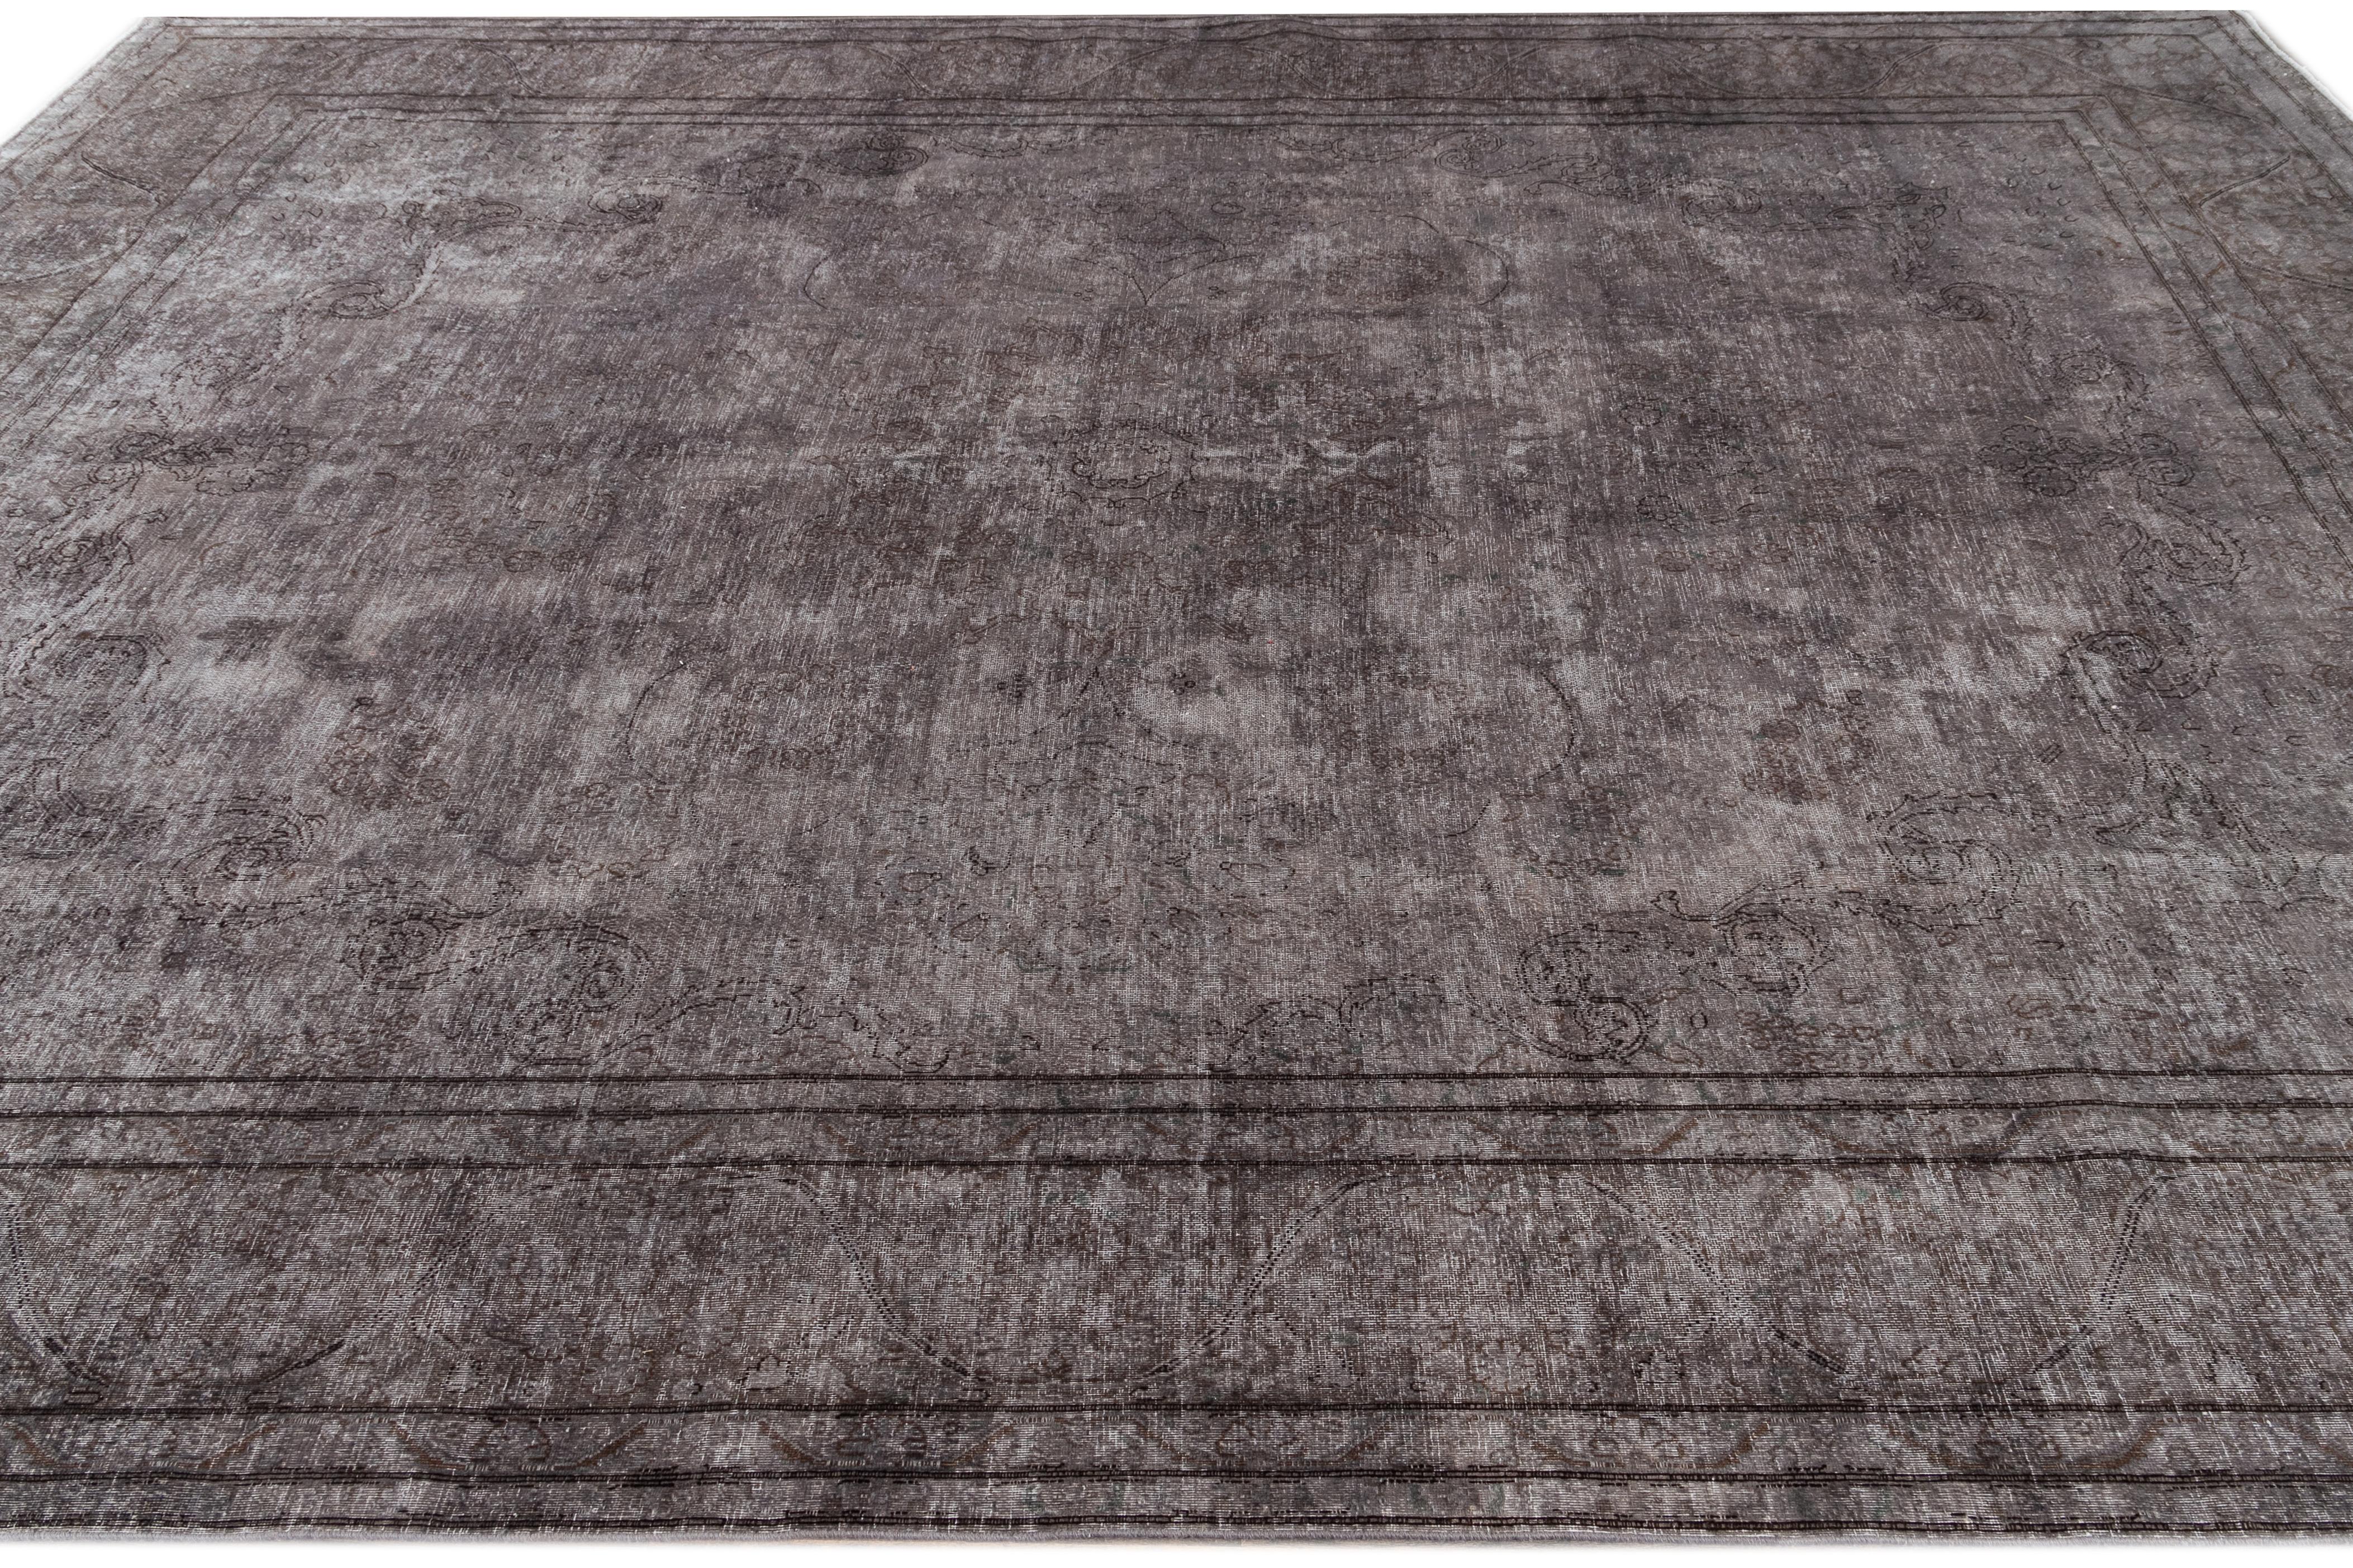 Vintage Gray Overdyed Handmade Wool Rug In Distressed Condition For Sale In Norwalk, CT